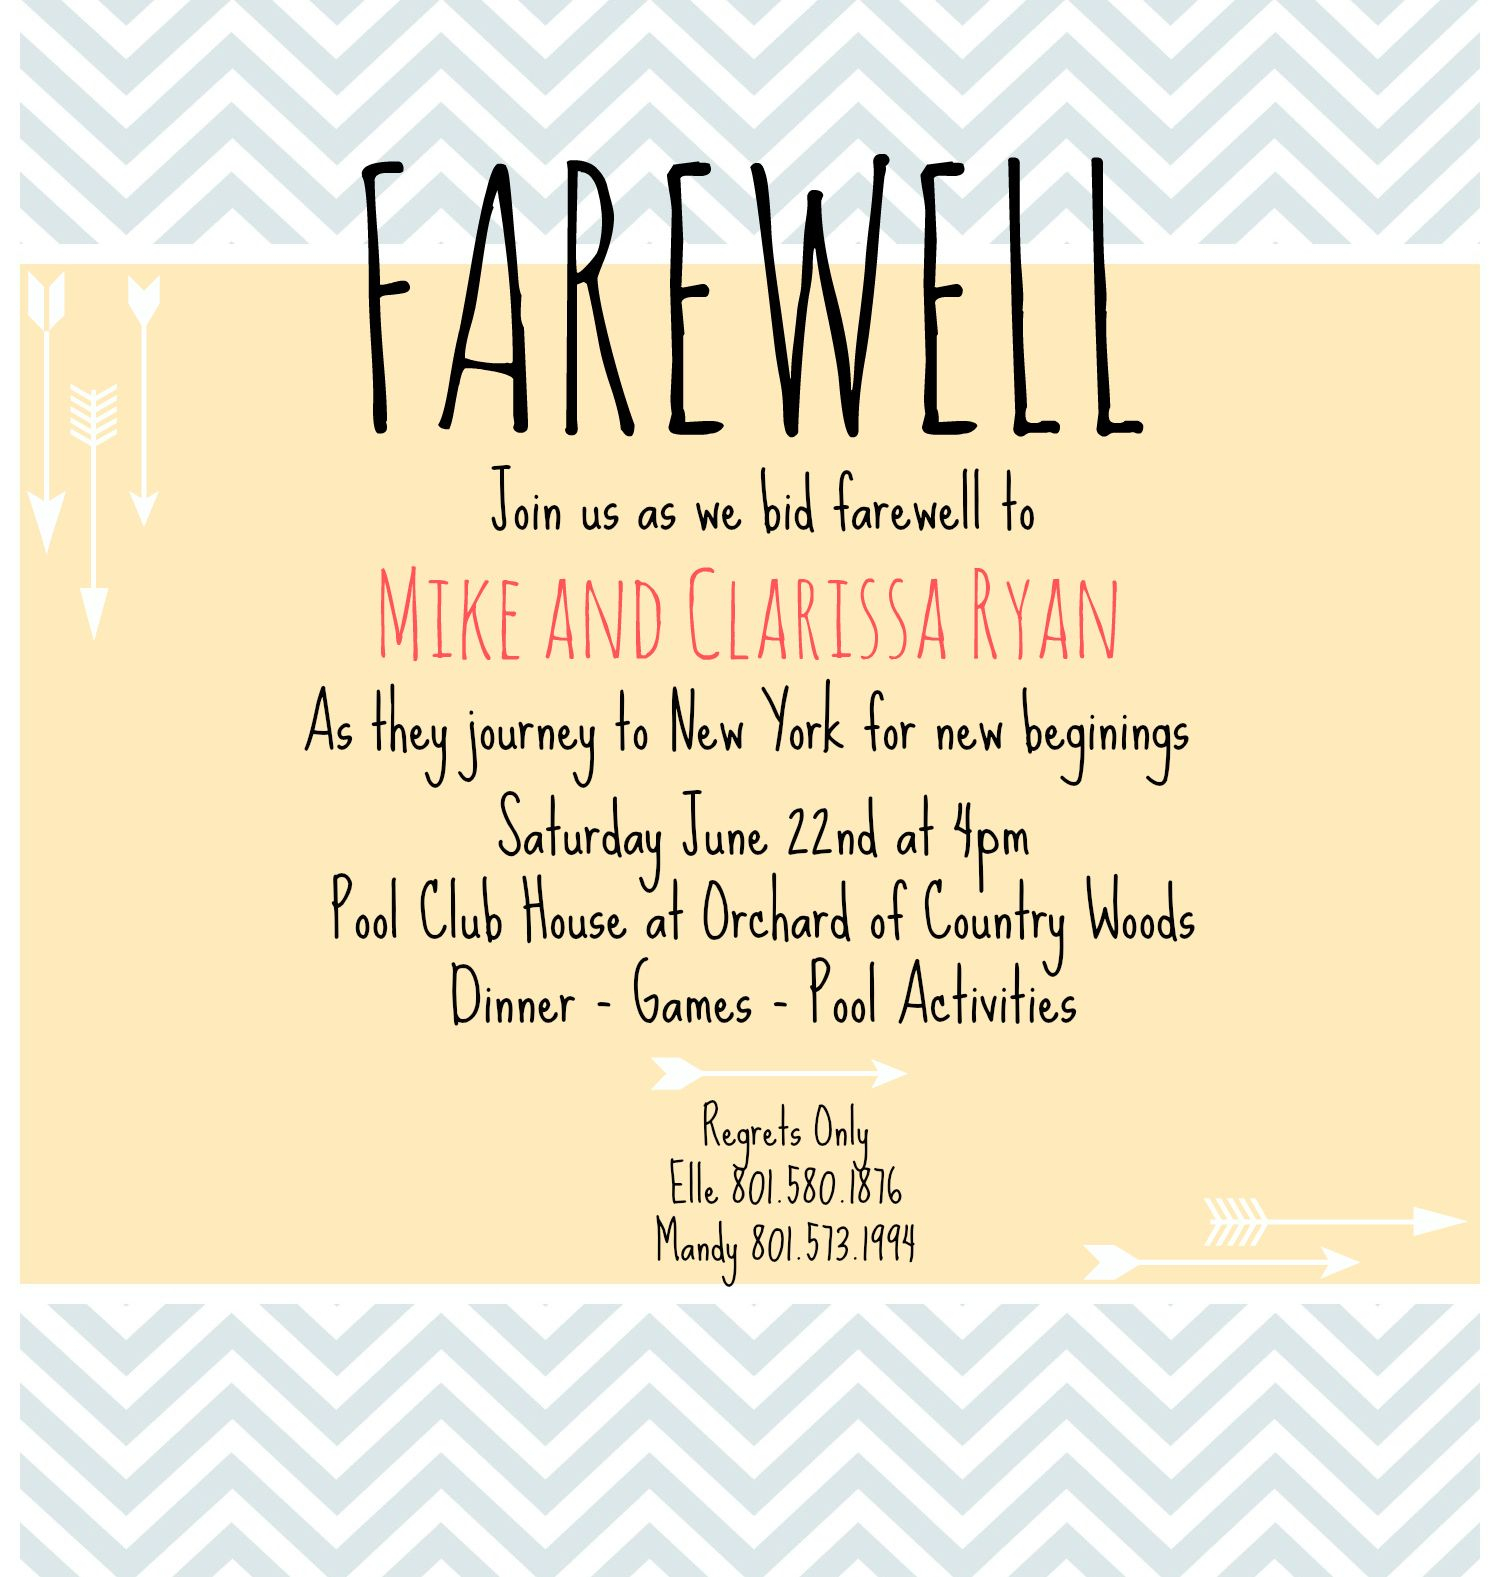 Farewell Invite Picmonkey Creations Farewell Invitation intended for proportions 1491 X 1577